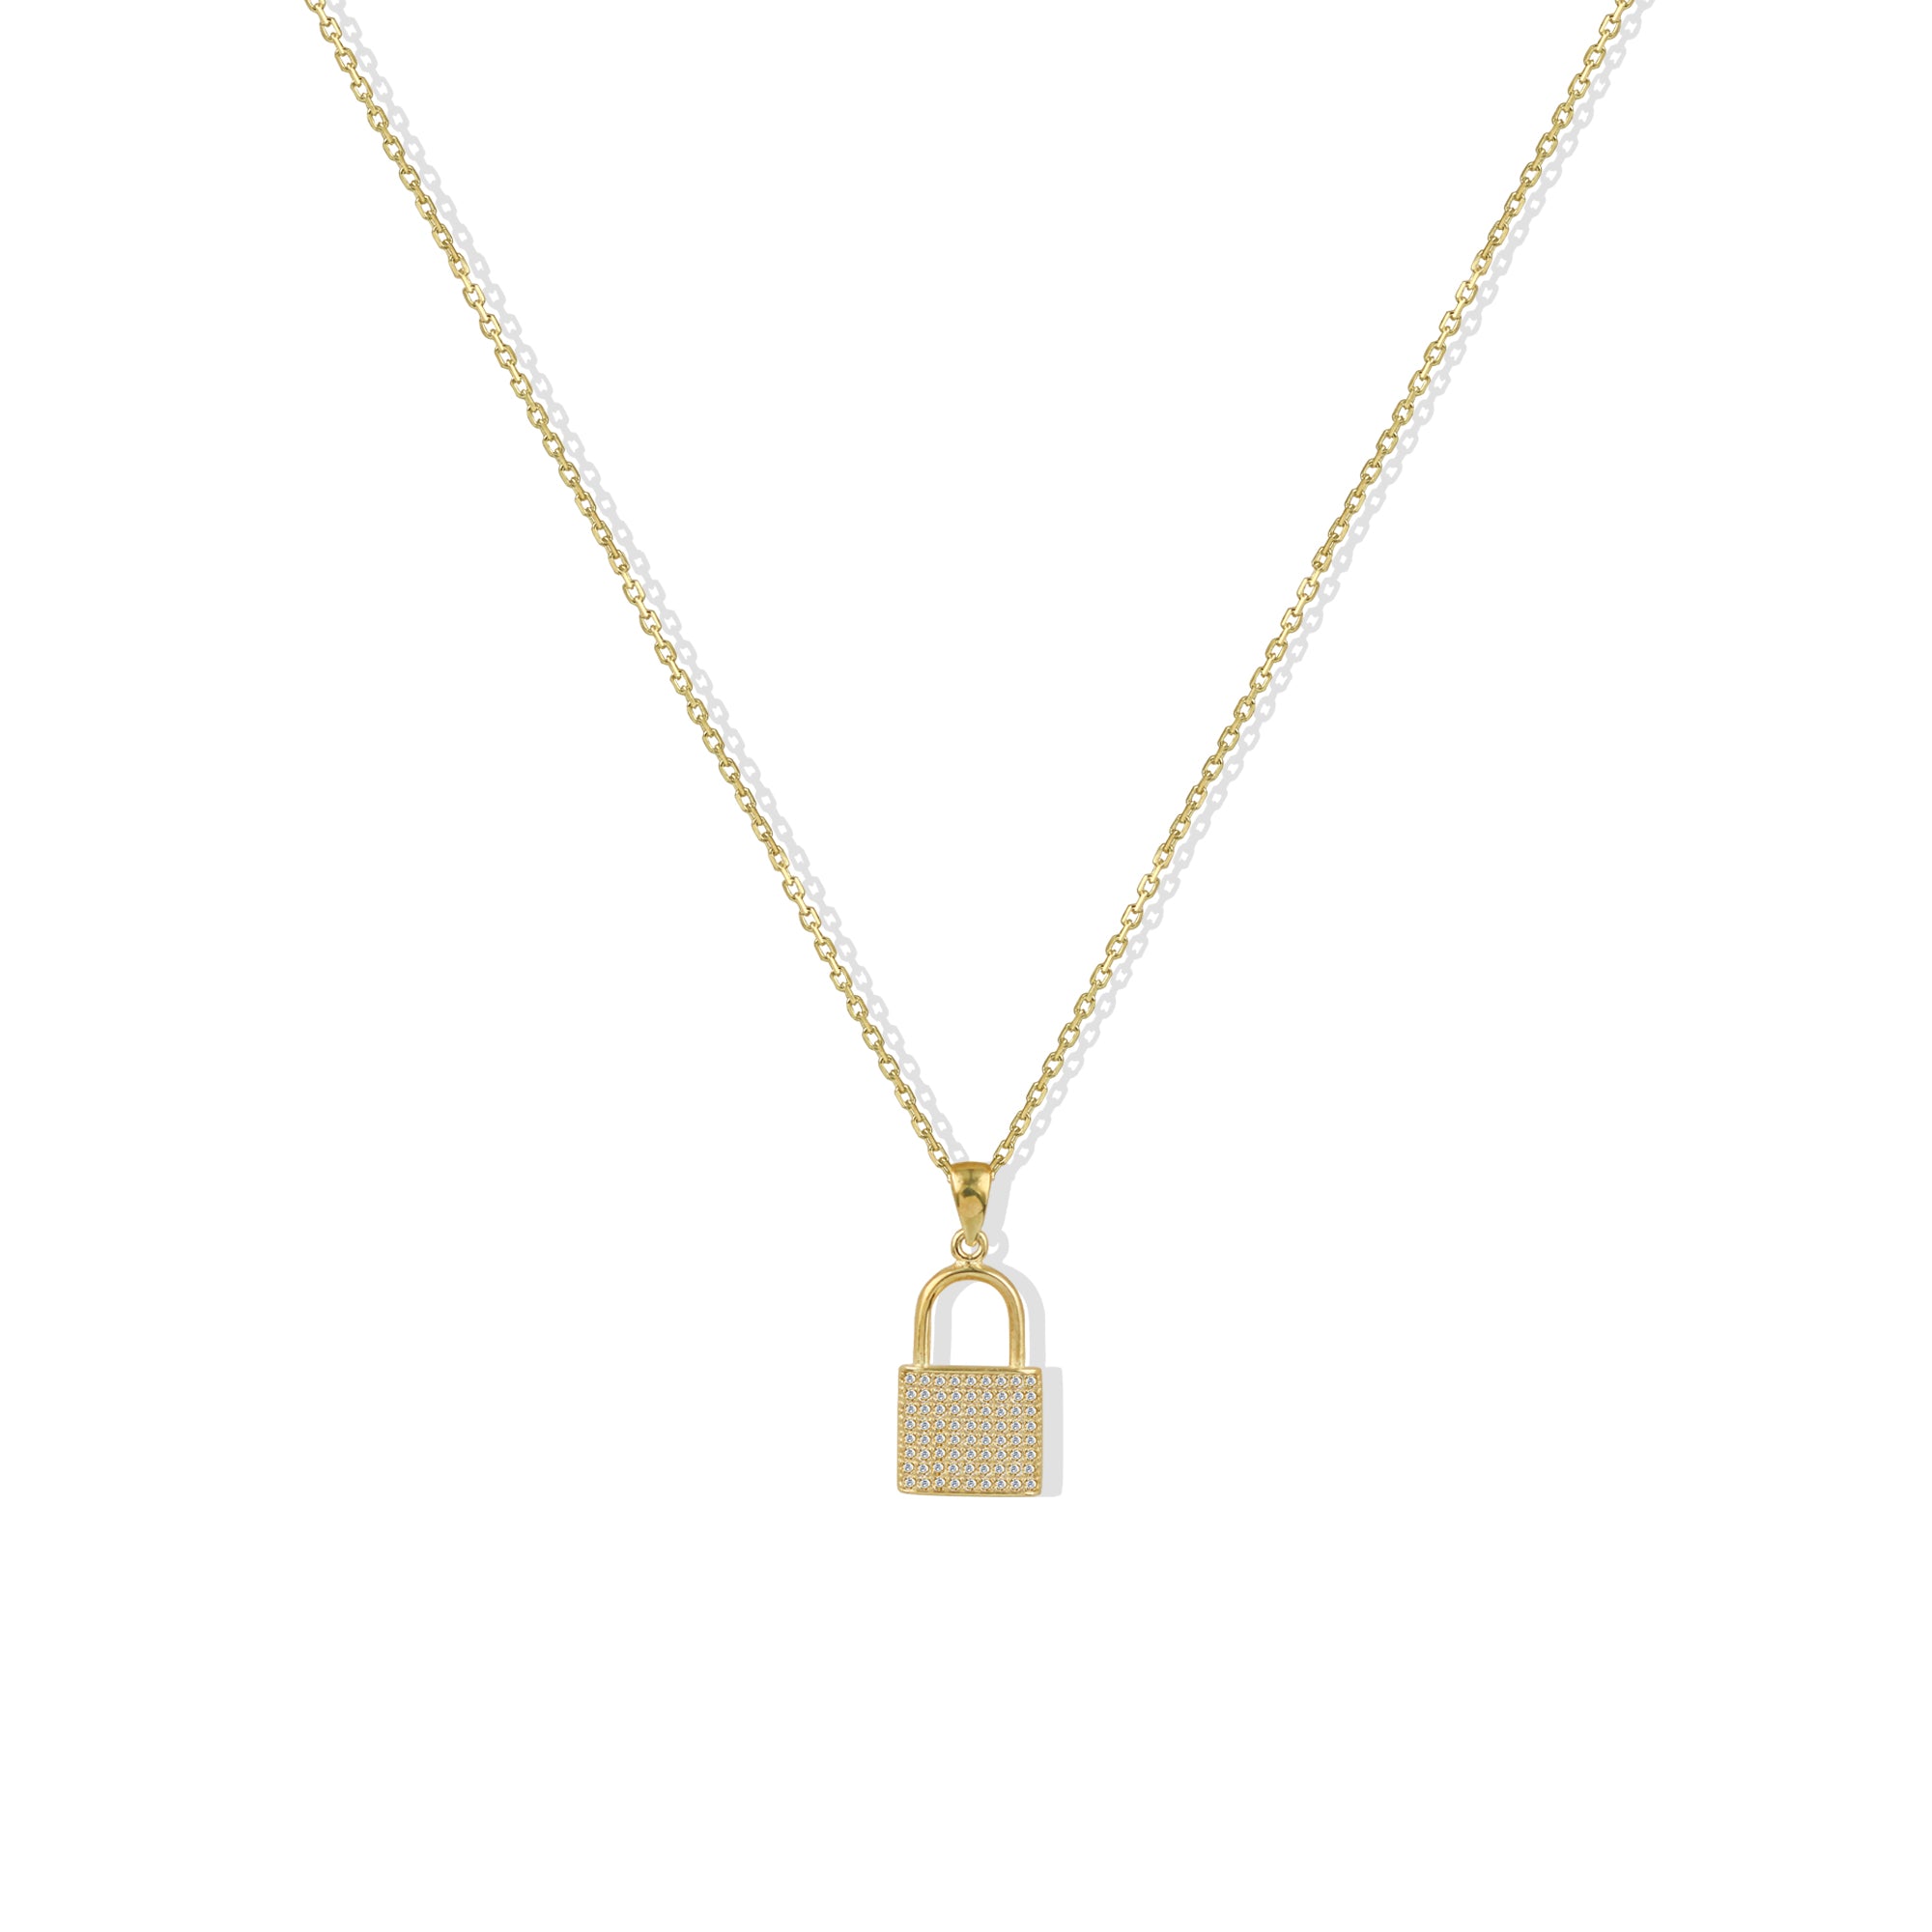 THE PAVE LOCK NECKLACE